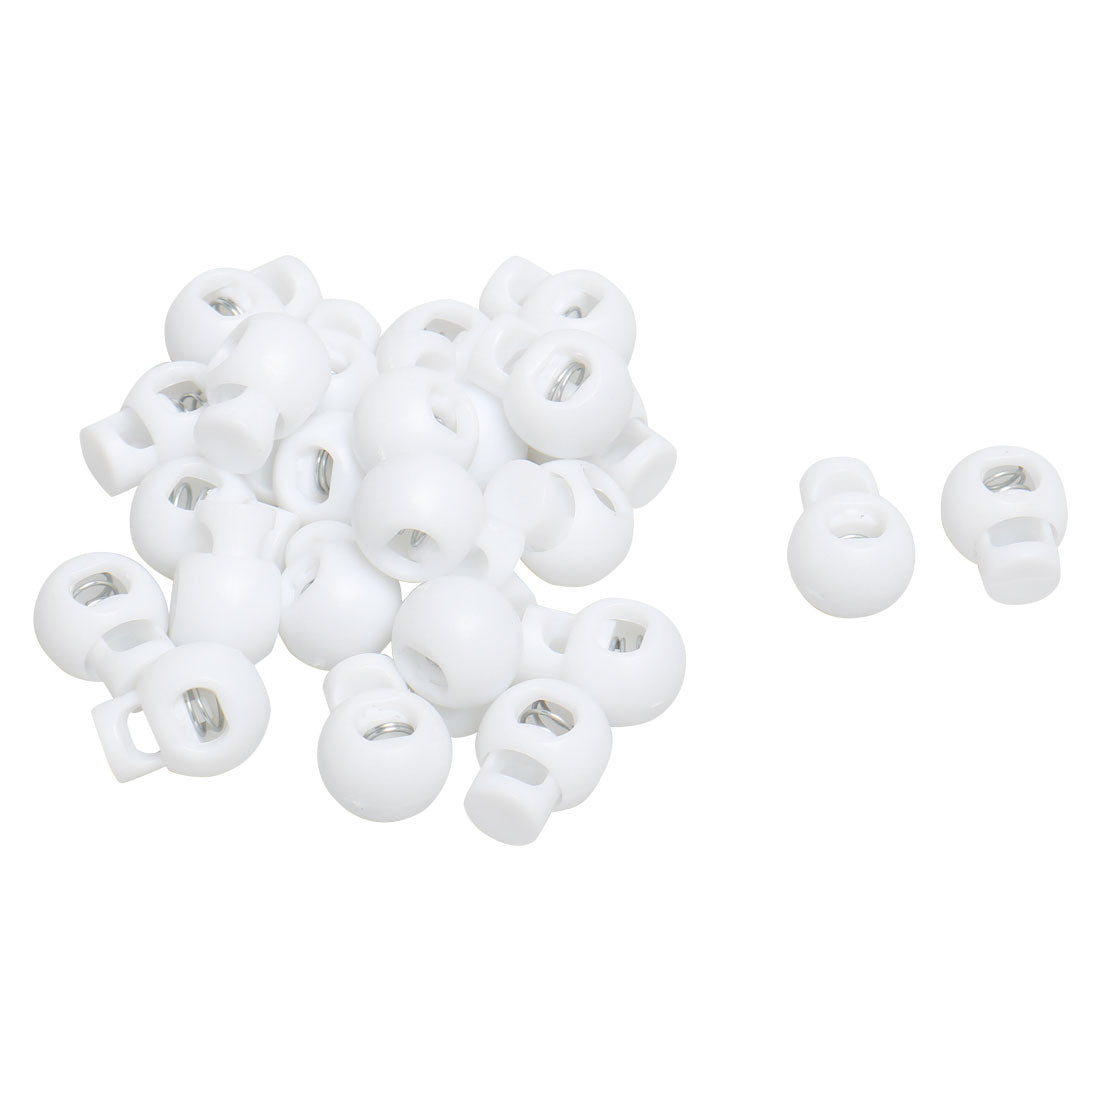 uxcell Uxcell 25pcs Plastic Cord Lock Stopper End Spring Fastener Organizer White